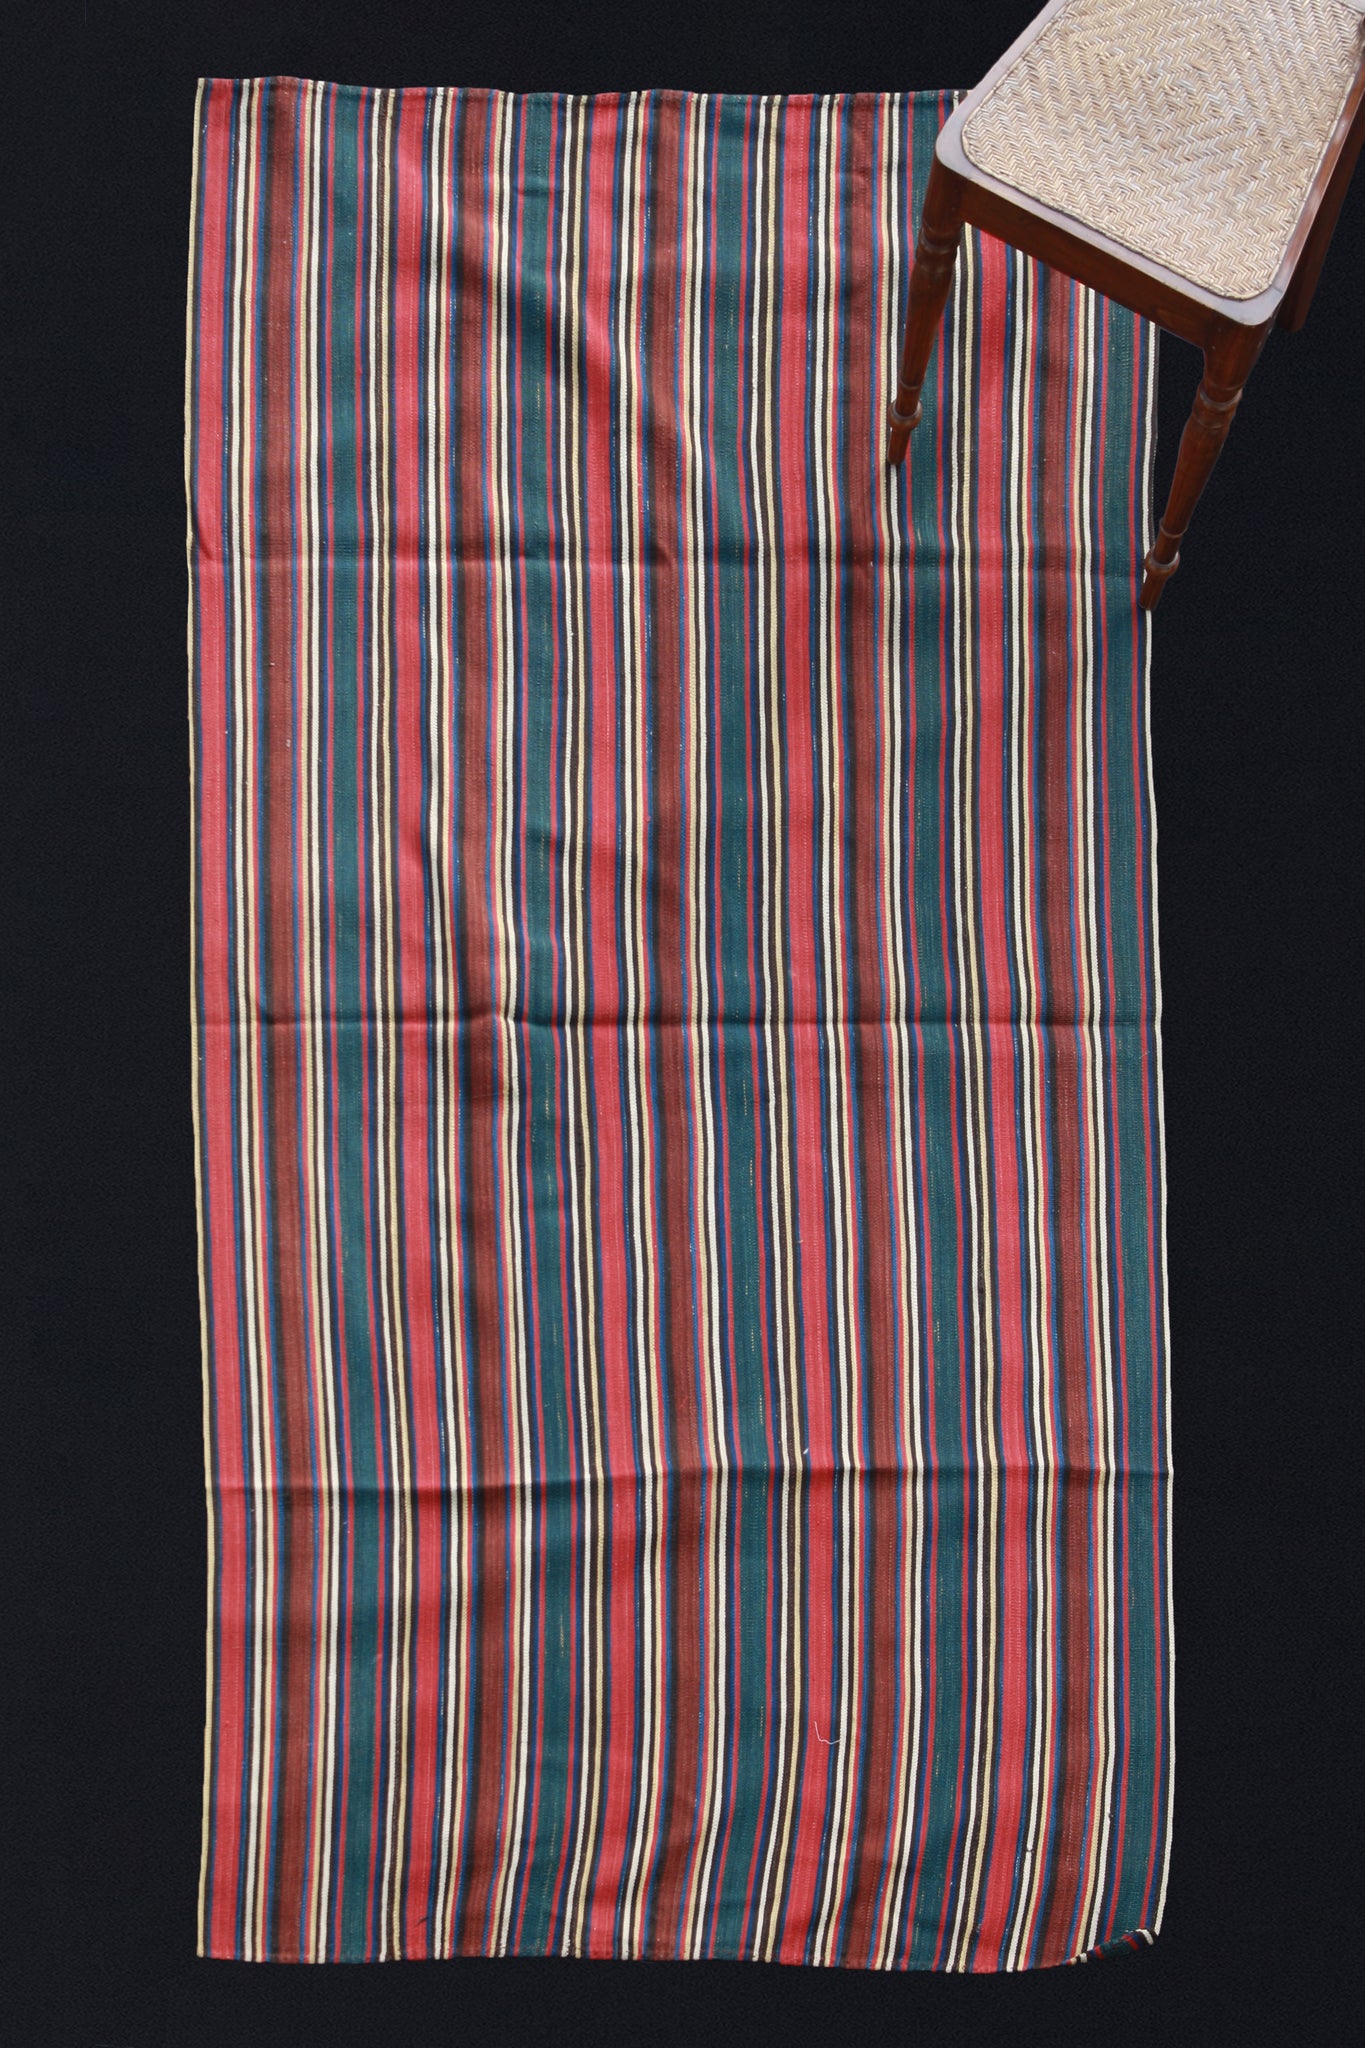 Long Stripe-Red, Brown, Blue and Green ...... (4' 6" x 9')